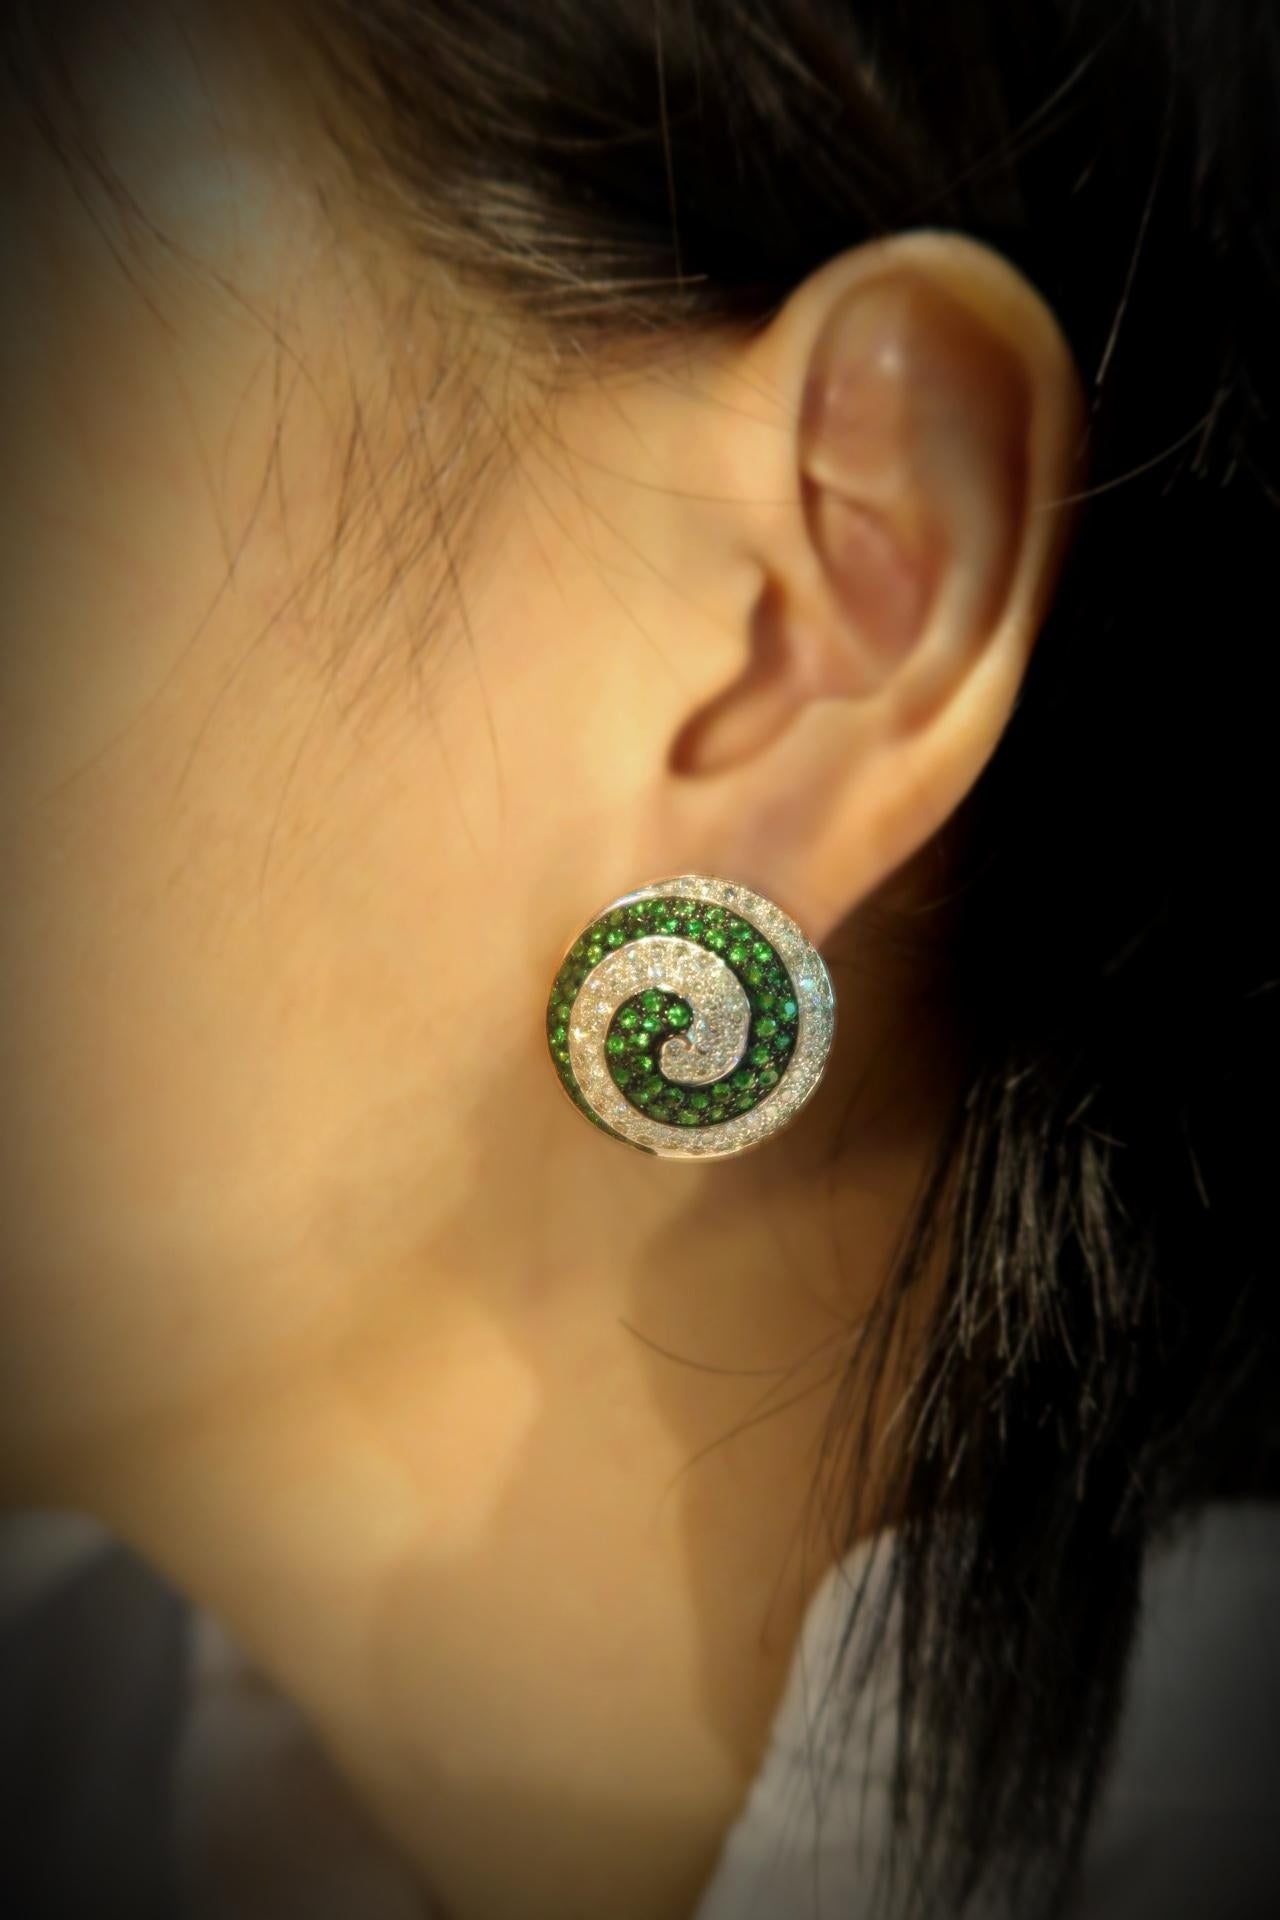 Tsavorite and Diamond Twirl Clip On Earrings in 18K White Gold for Pierced Ears

Please let us know should you wish to have the posts removed.

Tsavorite: 2.17 ct
Diamond: 1.88 ct
Gold: 18K White Gold, 27.93